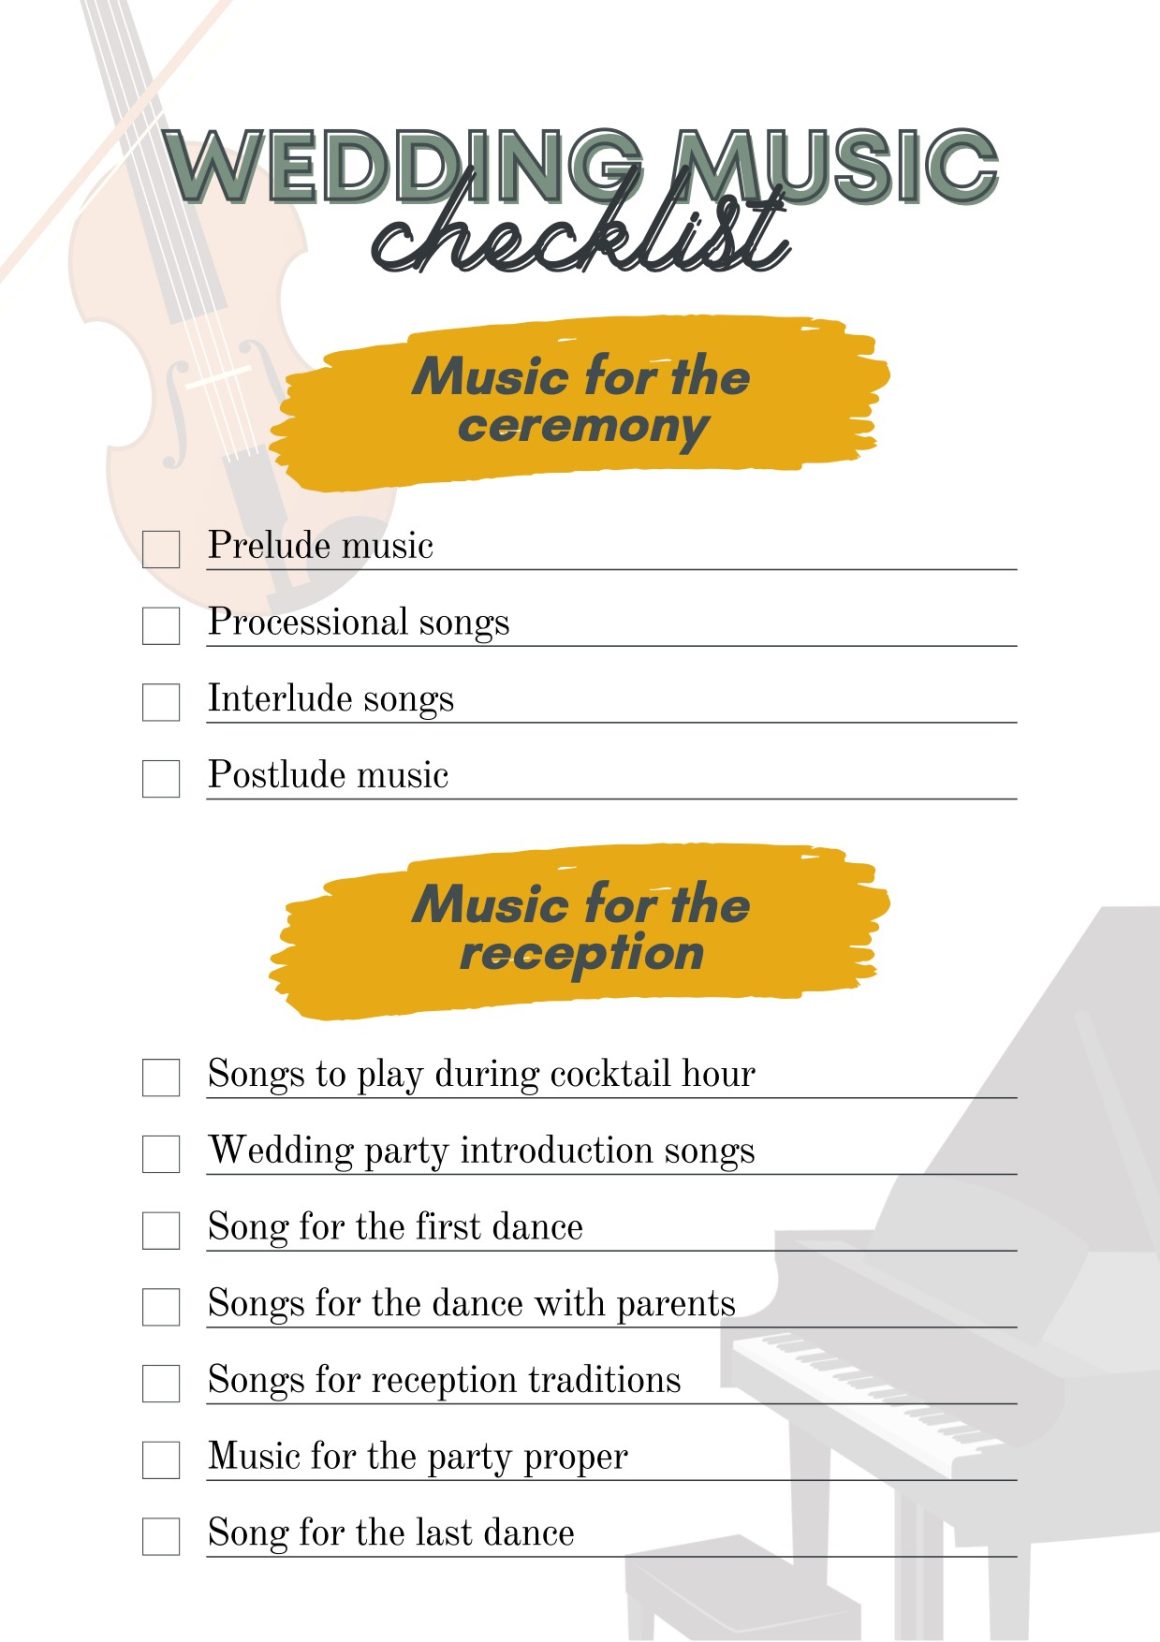 Wedding Song Checklist Guide (12 Things to Include)